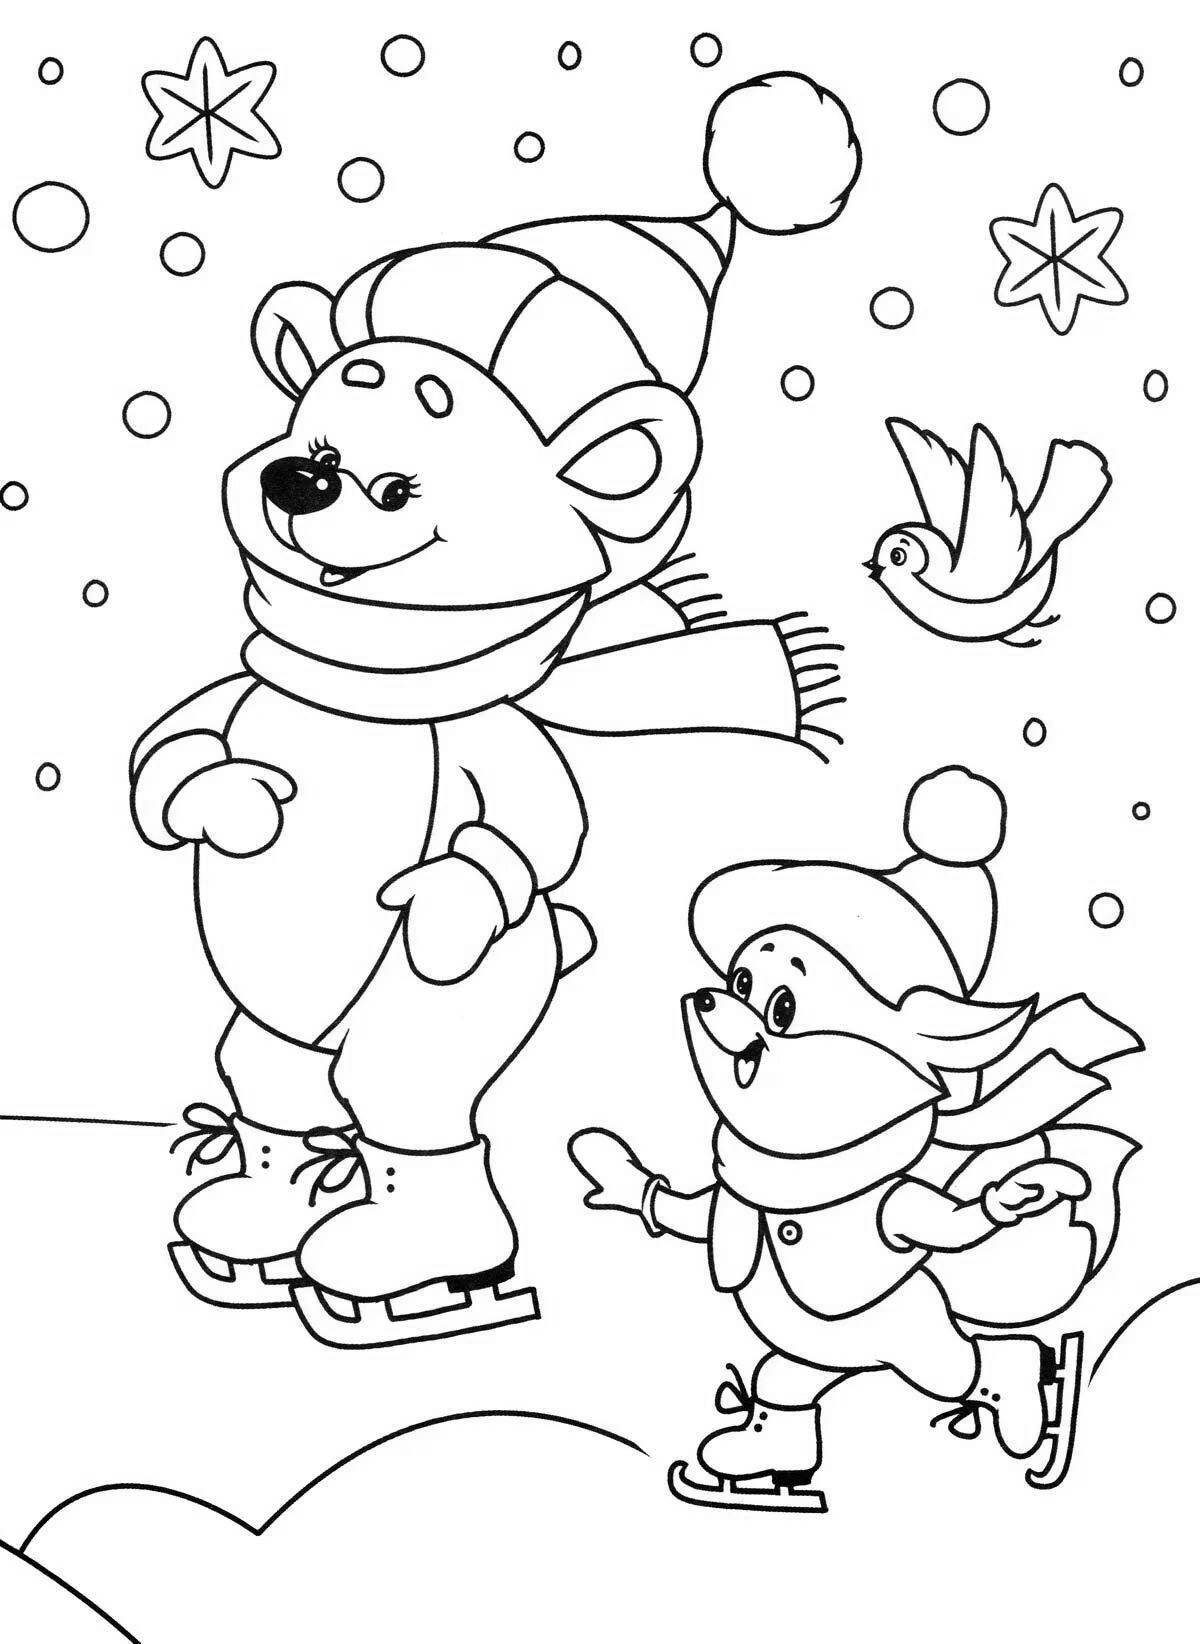 Live winter coloring for kids